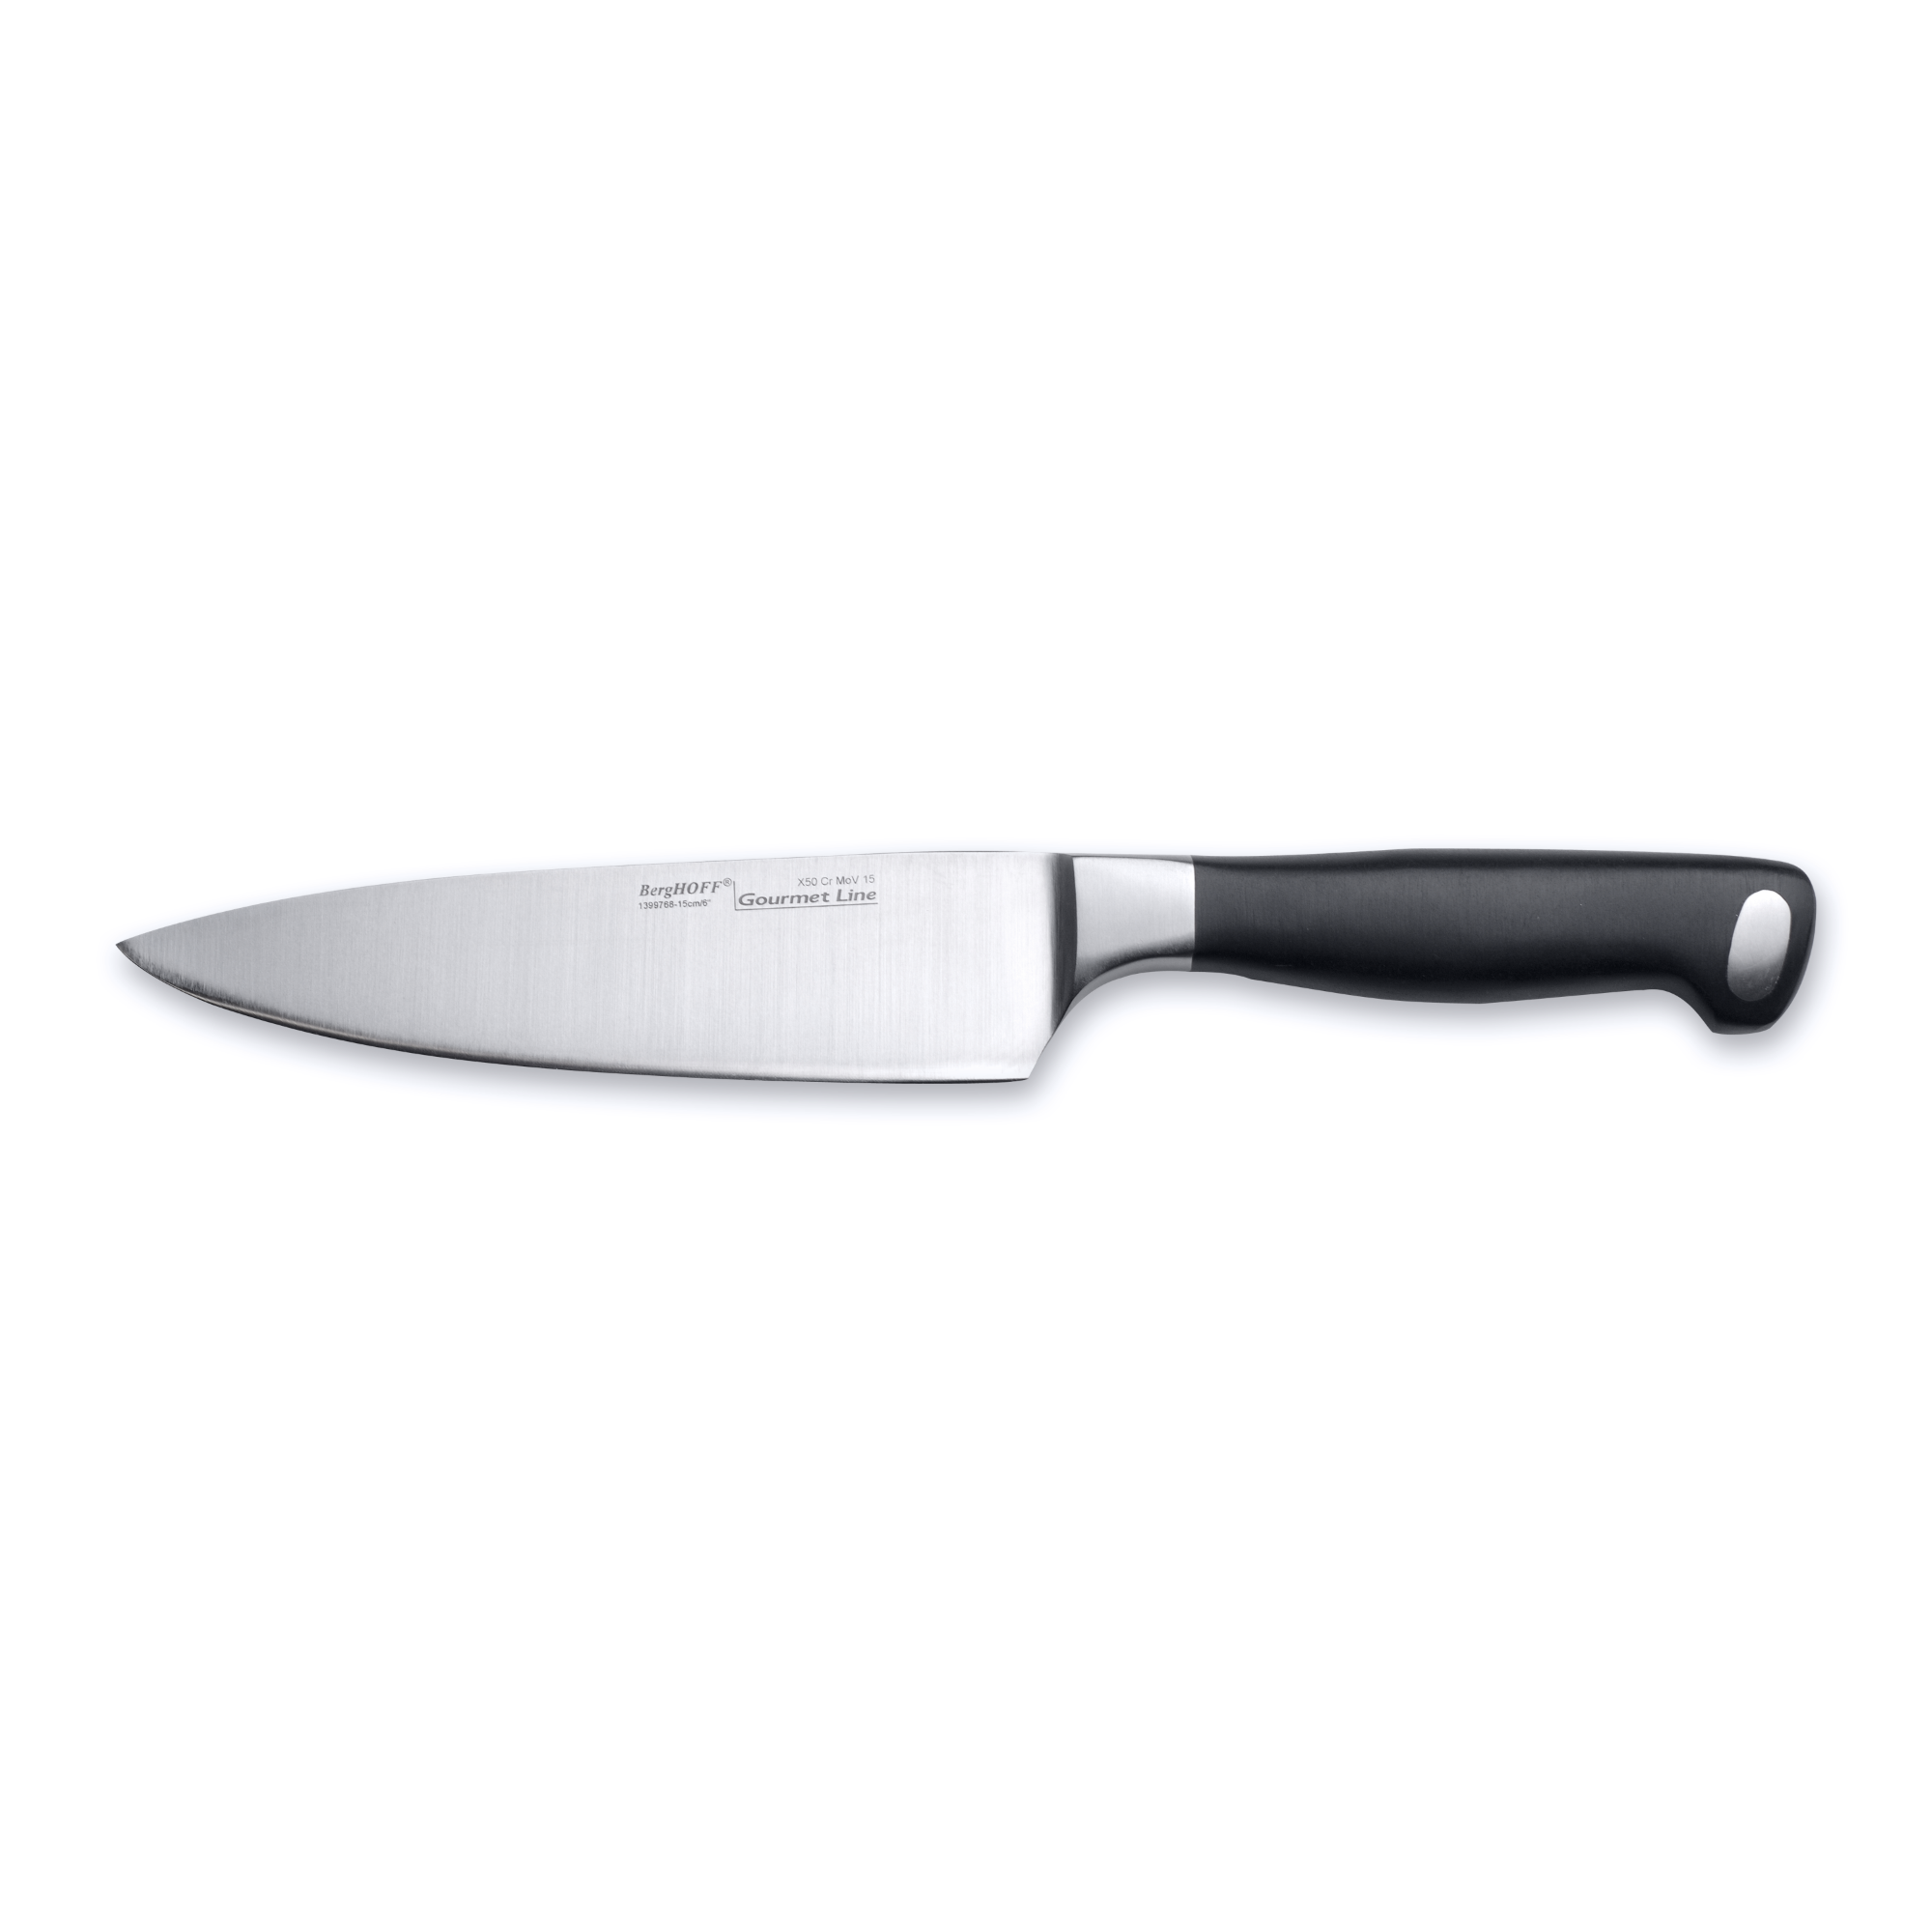 Chef's knife 15 cm - Hotel | Official BergHOFF website